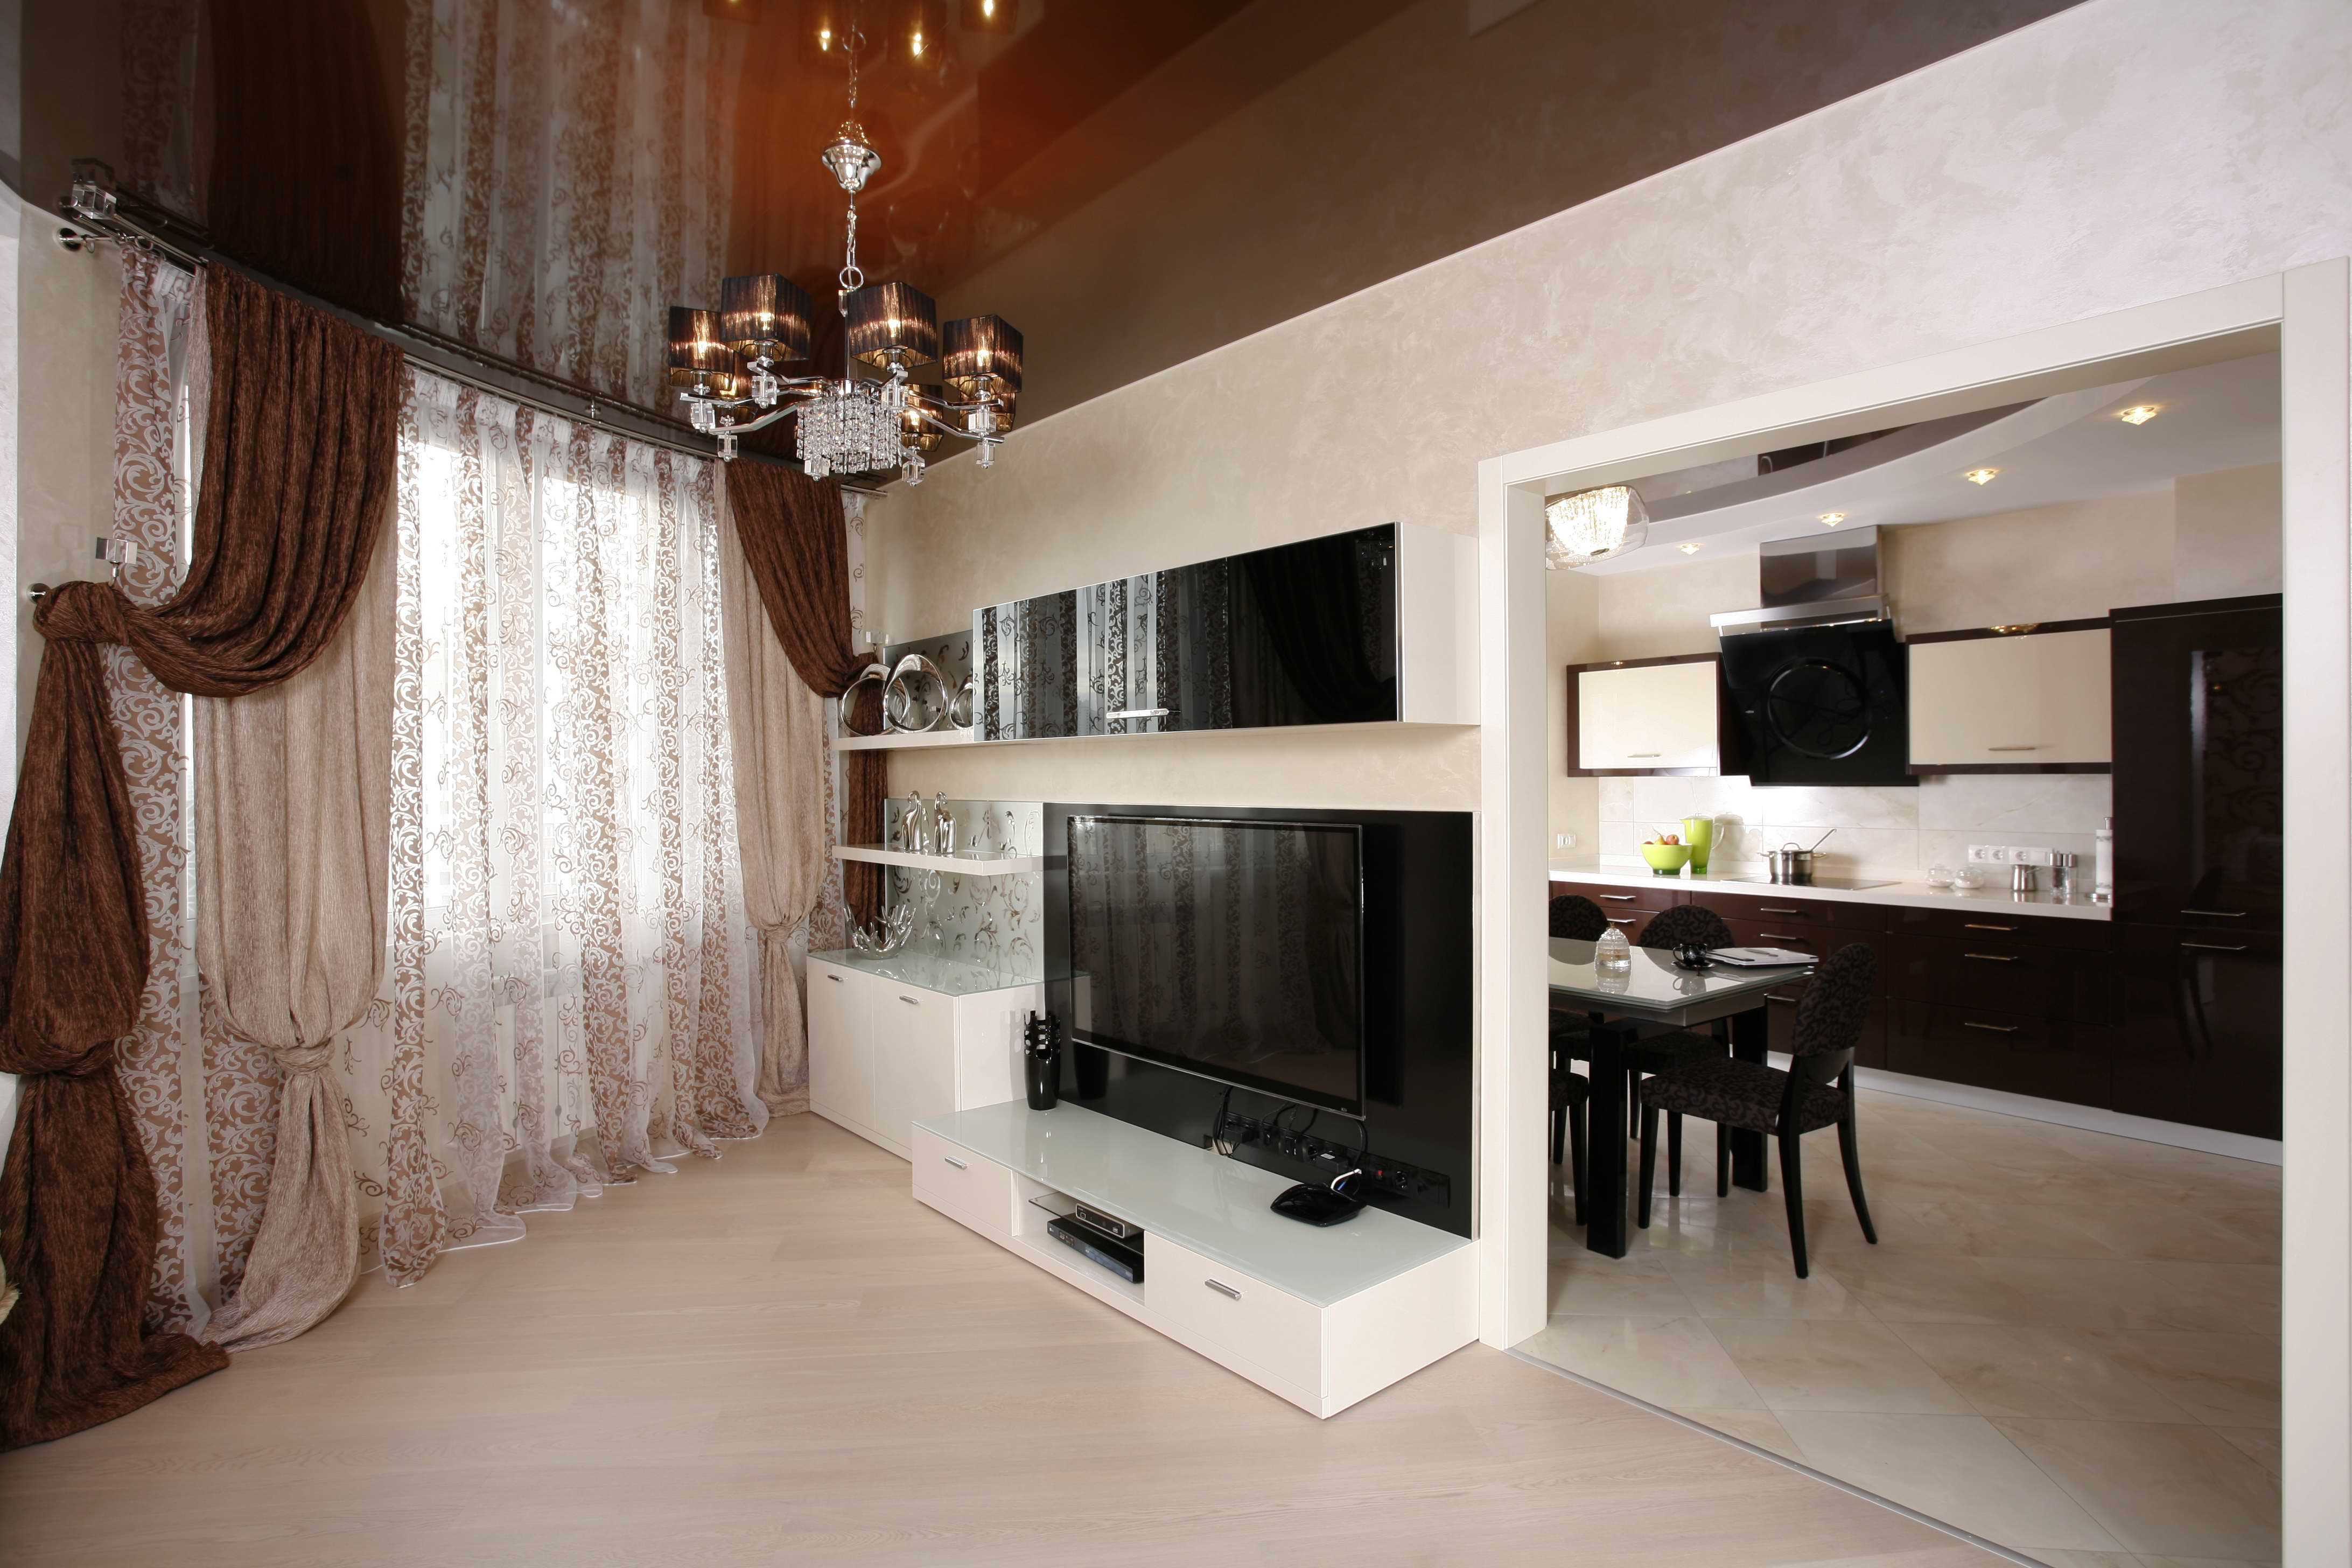 variant of a beautiful style studio apartment